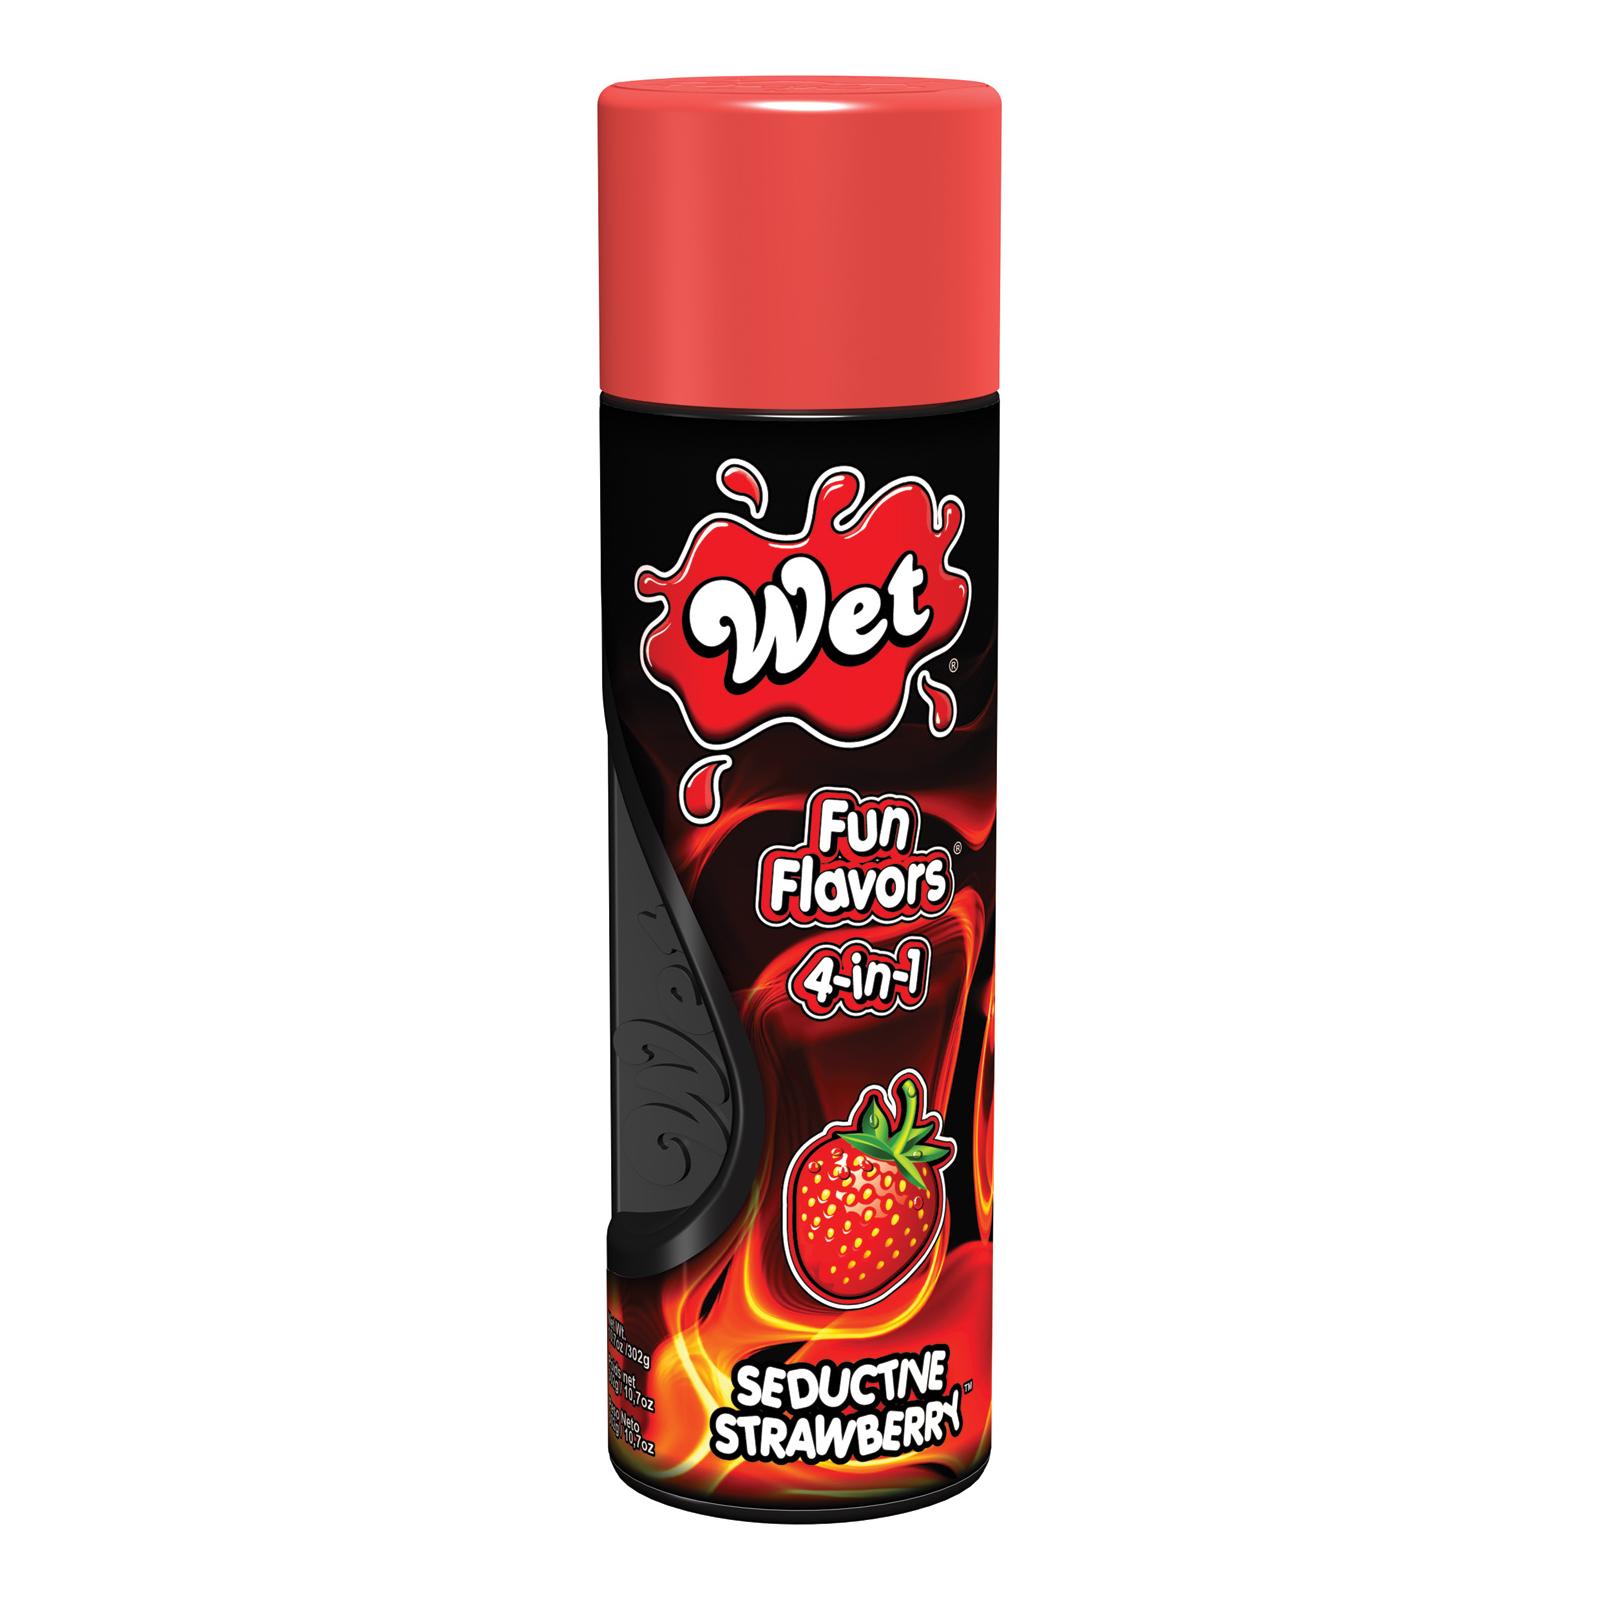 Wet Fun Flavors 4 In 1 Lubricant Seductive Strawberry 10.7 Ounces